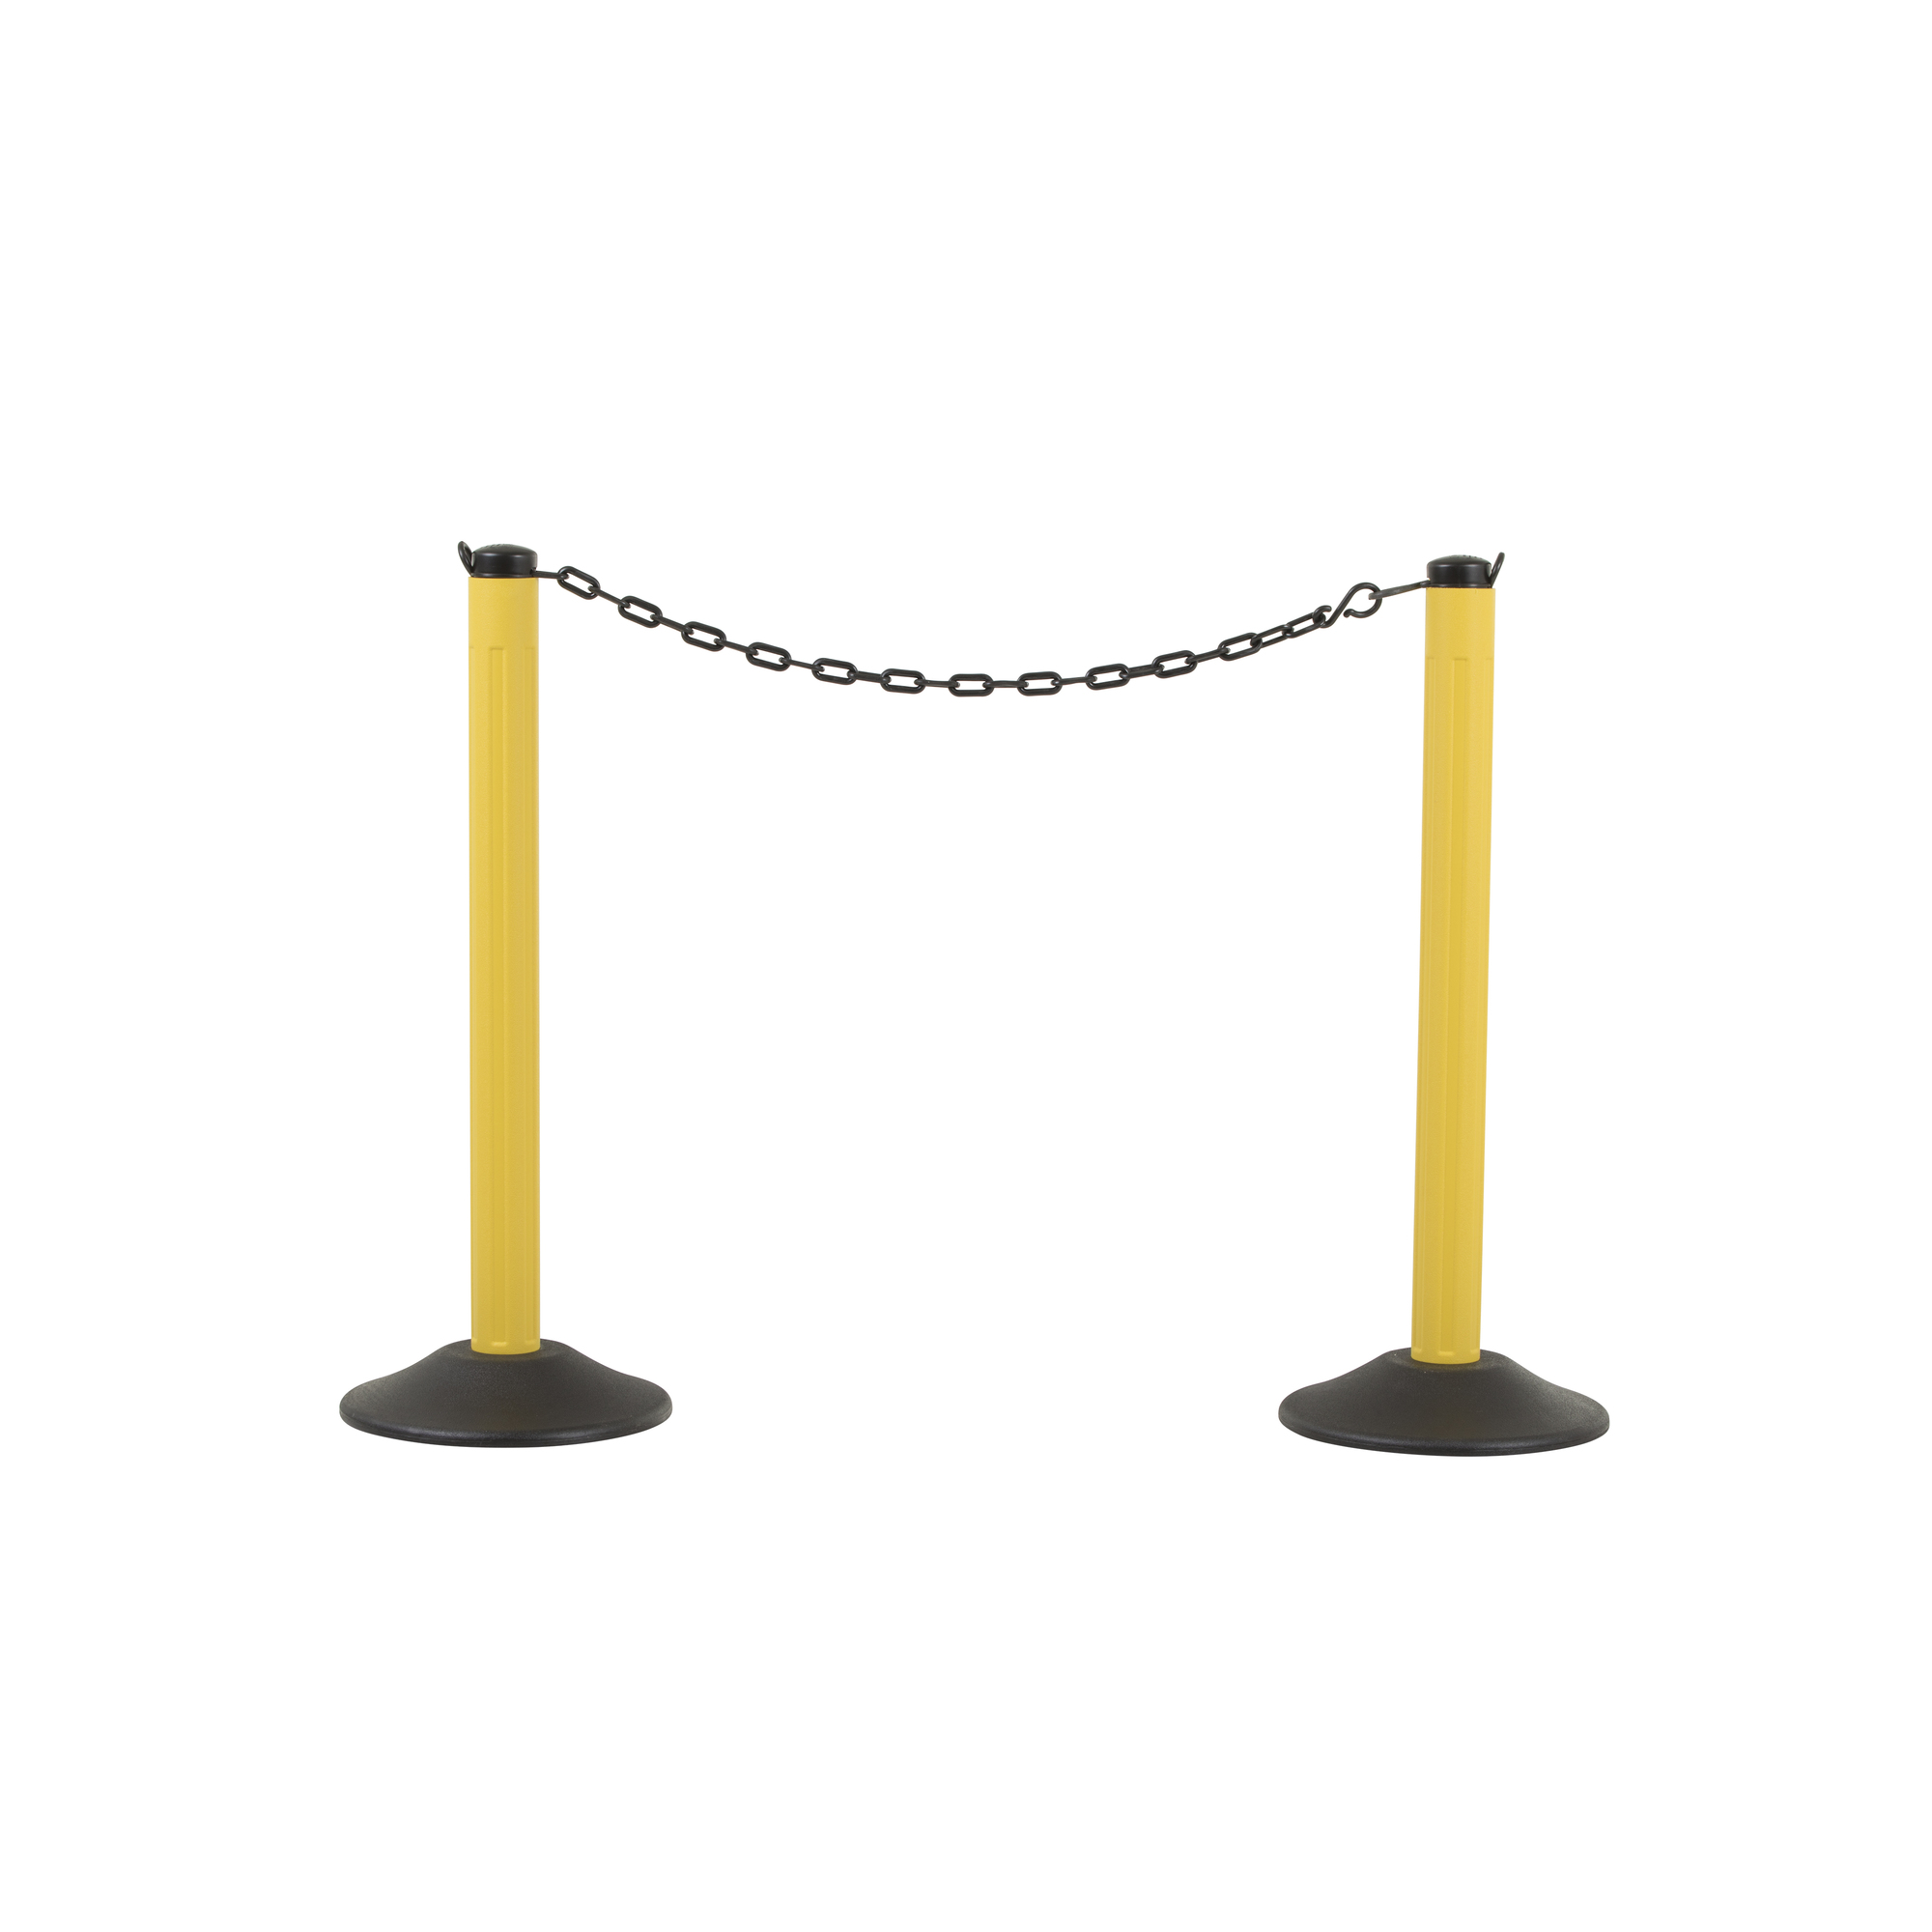 US Weight, ylw post, 10ft. of 2Inch Blk chain weighted base 2pk, Model U2007